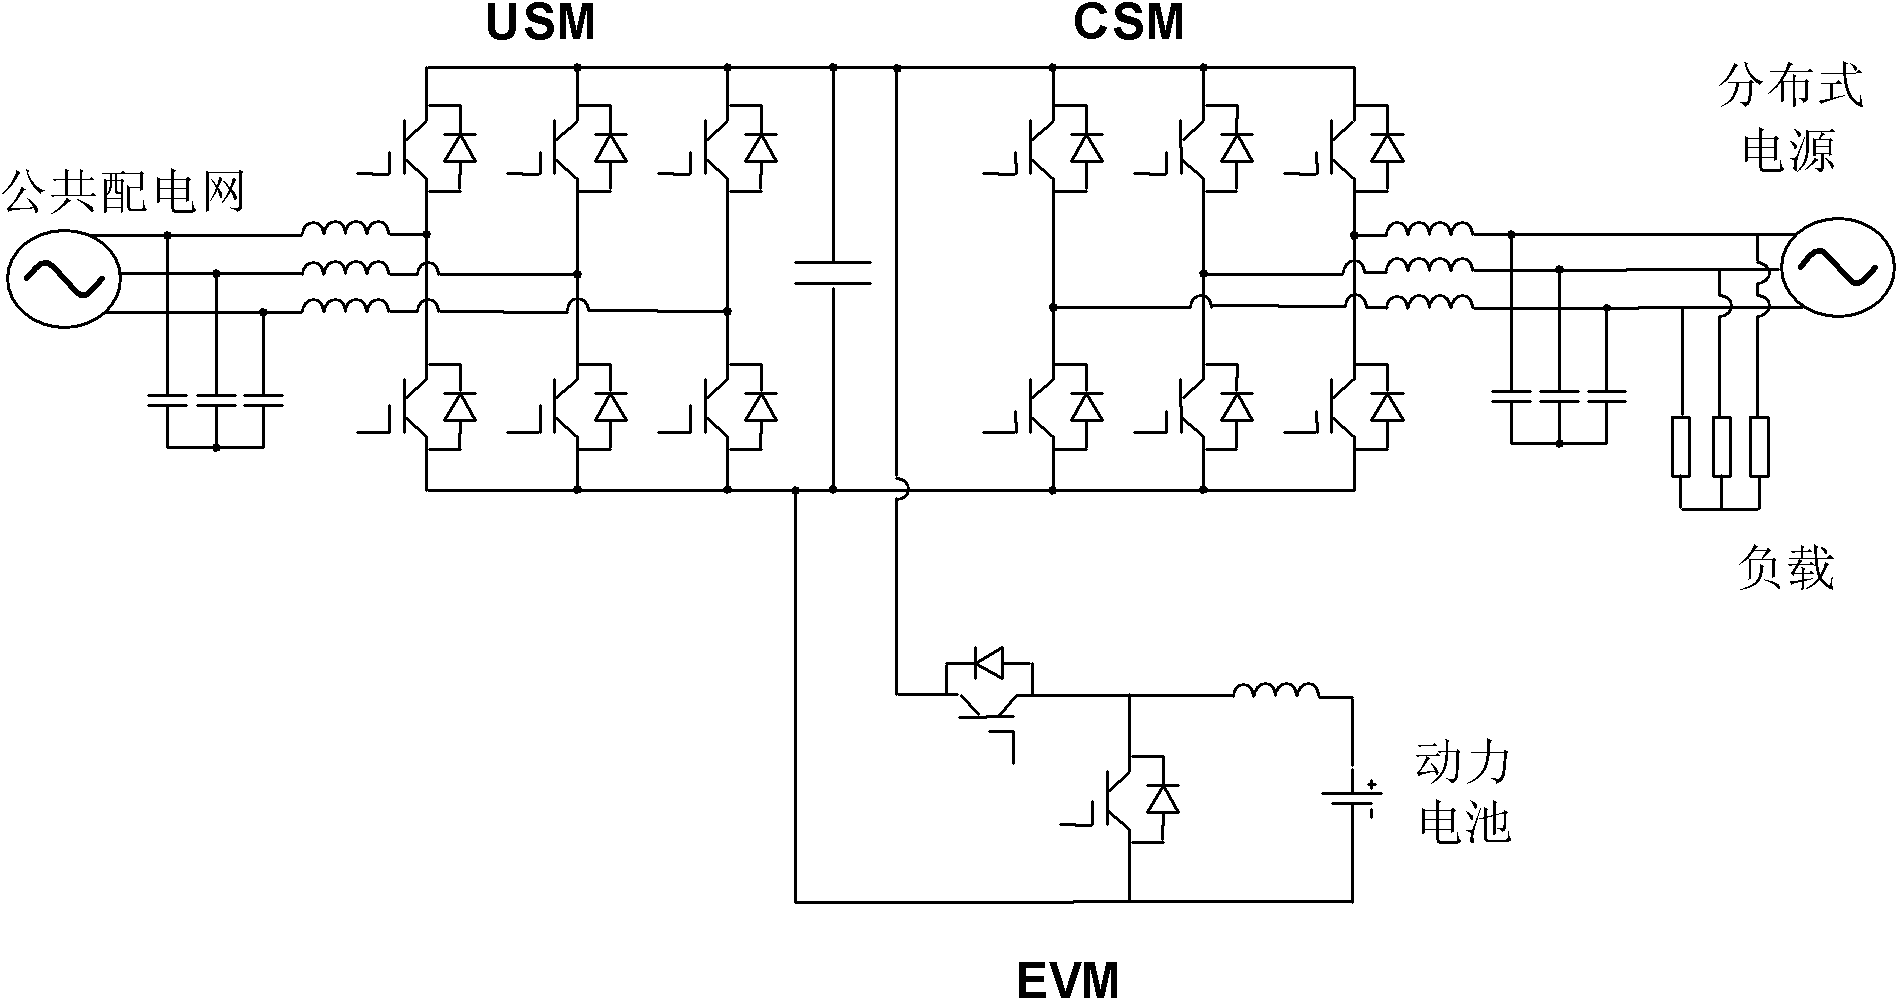 Standardized current conversion device of electric vehicle and distributed power source